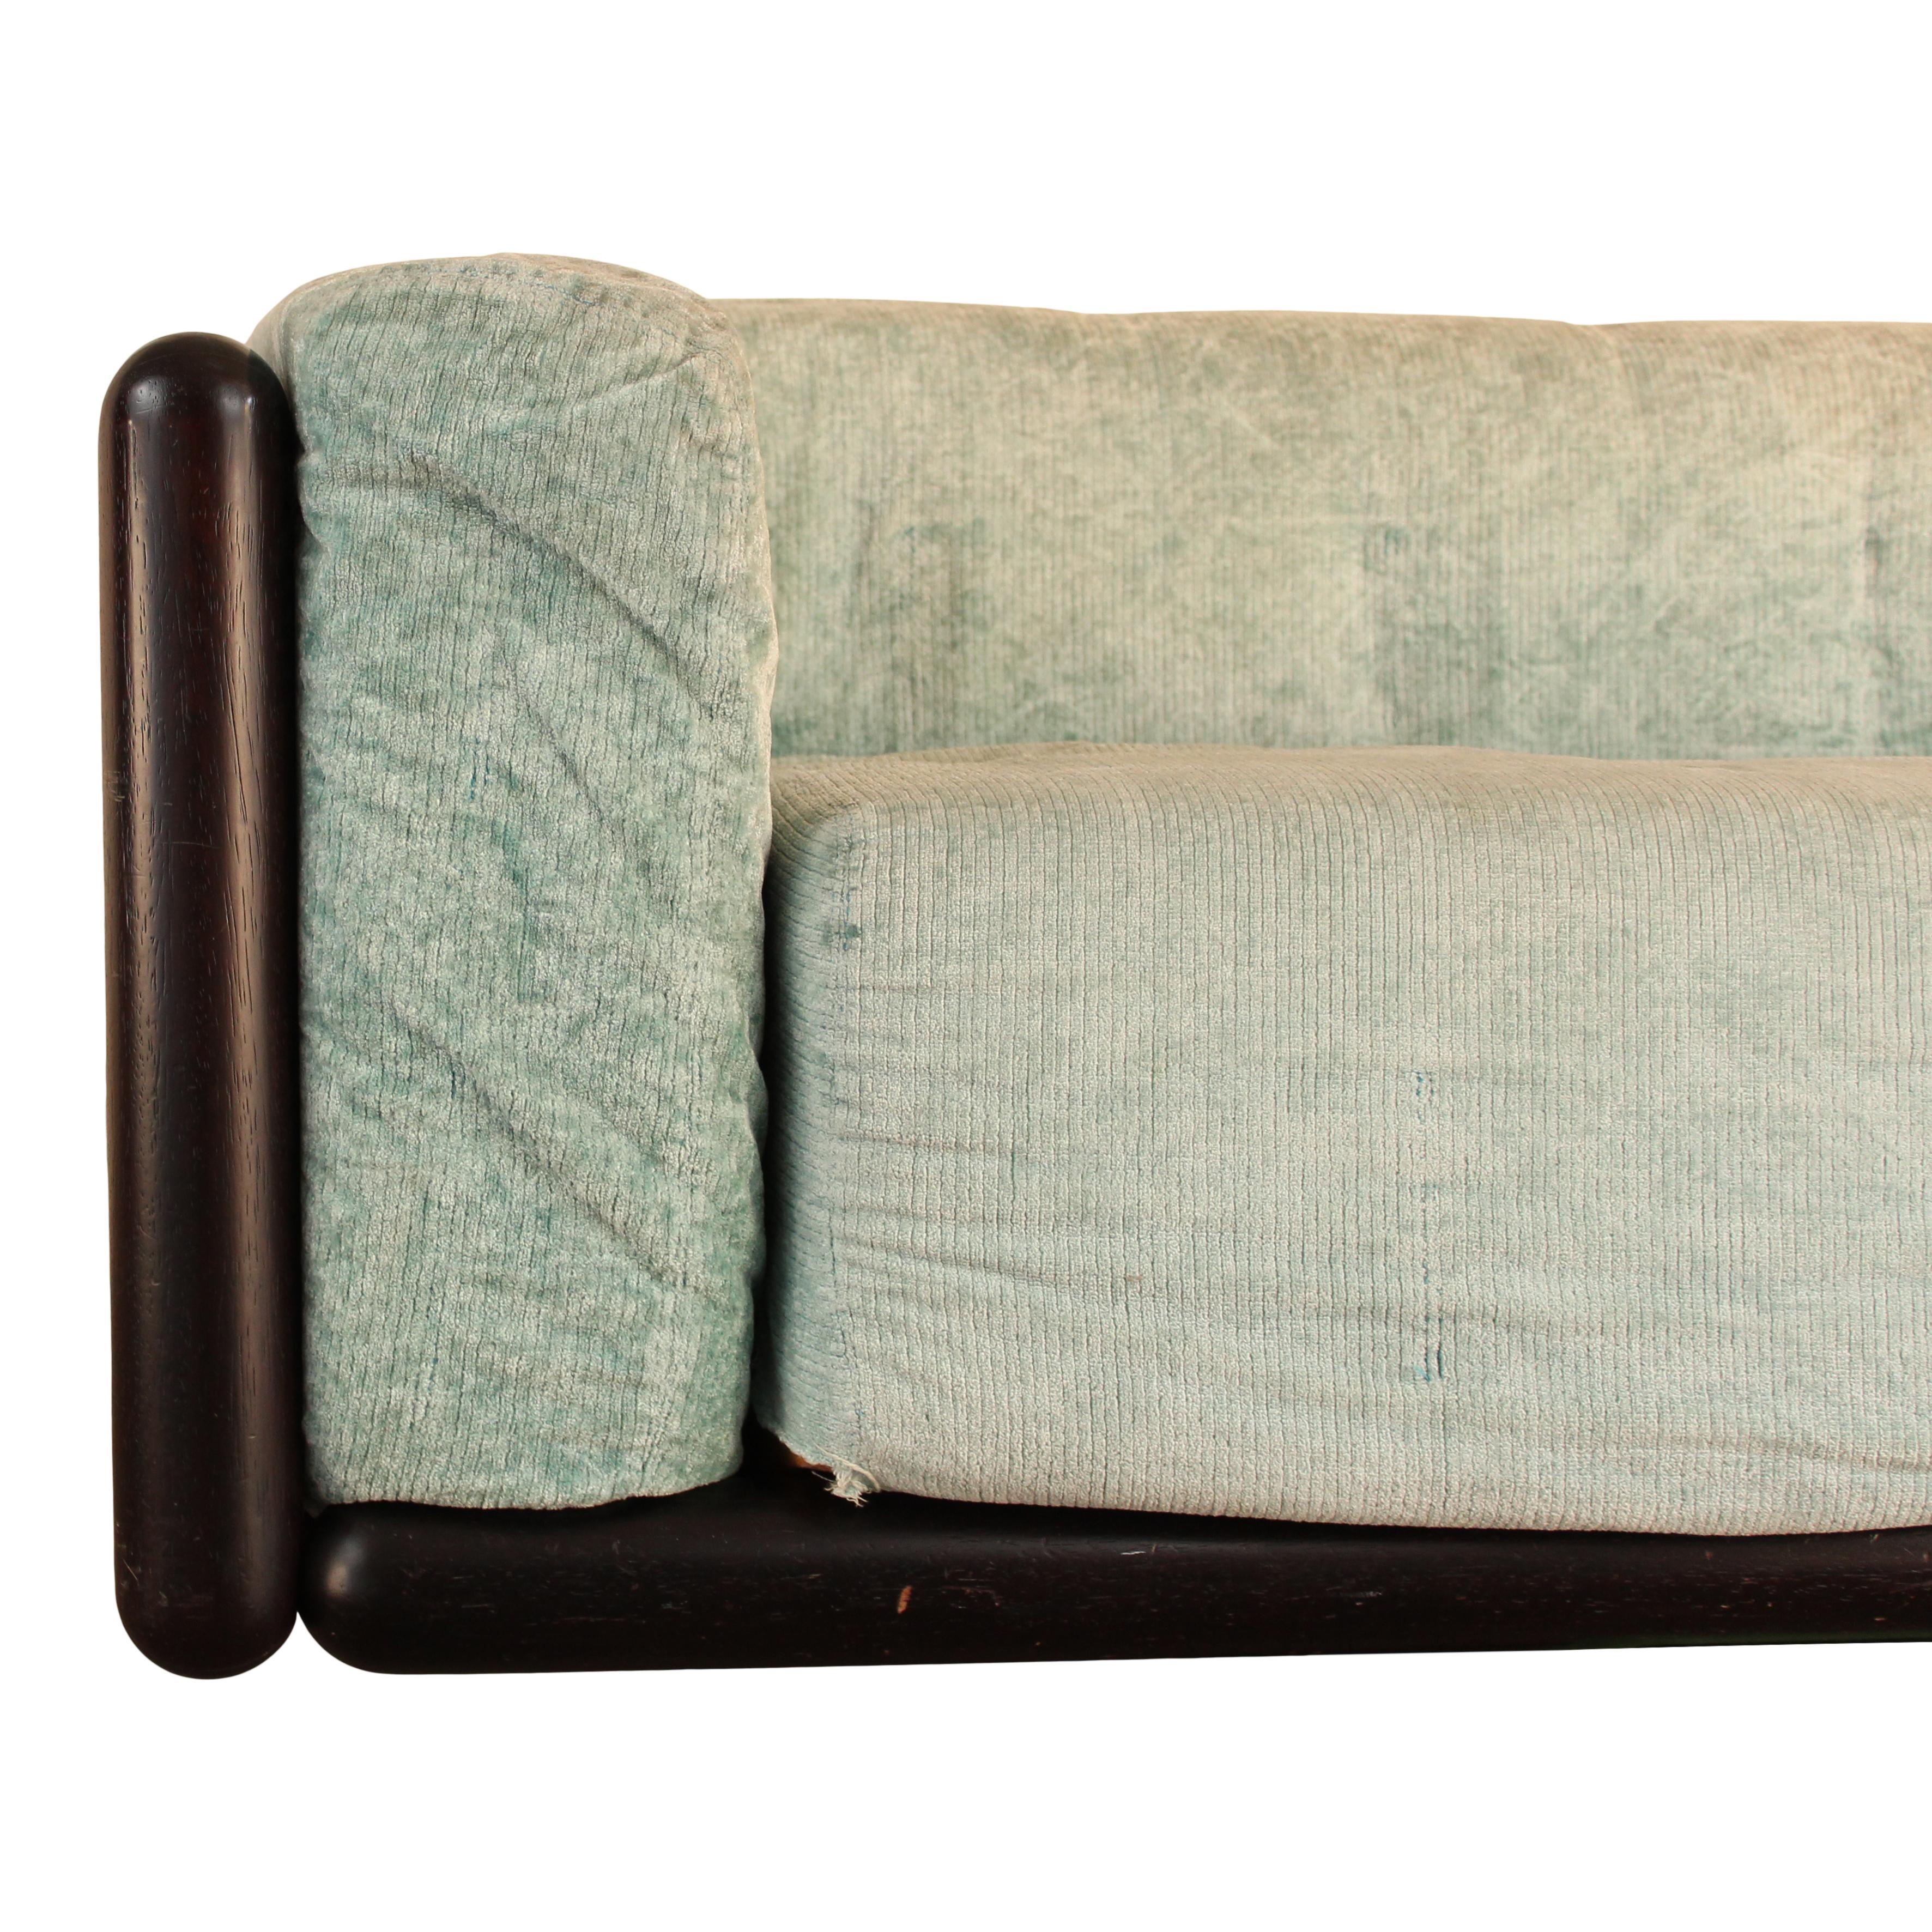 Cornaro two-seater sofa, designed by Carlo Scarpa and manufactured by Studio Simon in 1974.

Made of Iroko wood, foam, and azure chenille velvet.

Excellent vintage condition.

Born in Venice on June 2nd, 1906, Carlo Scarpa began working very